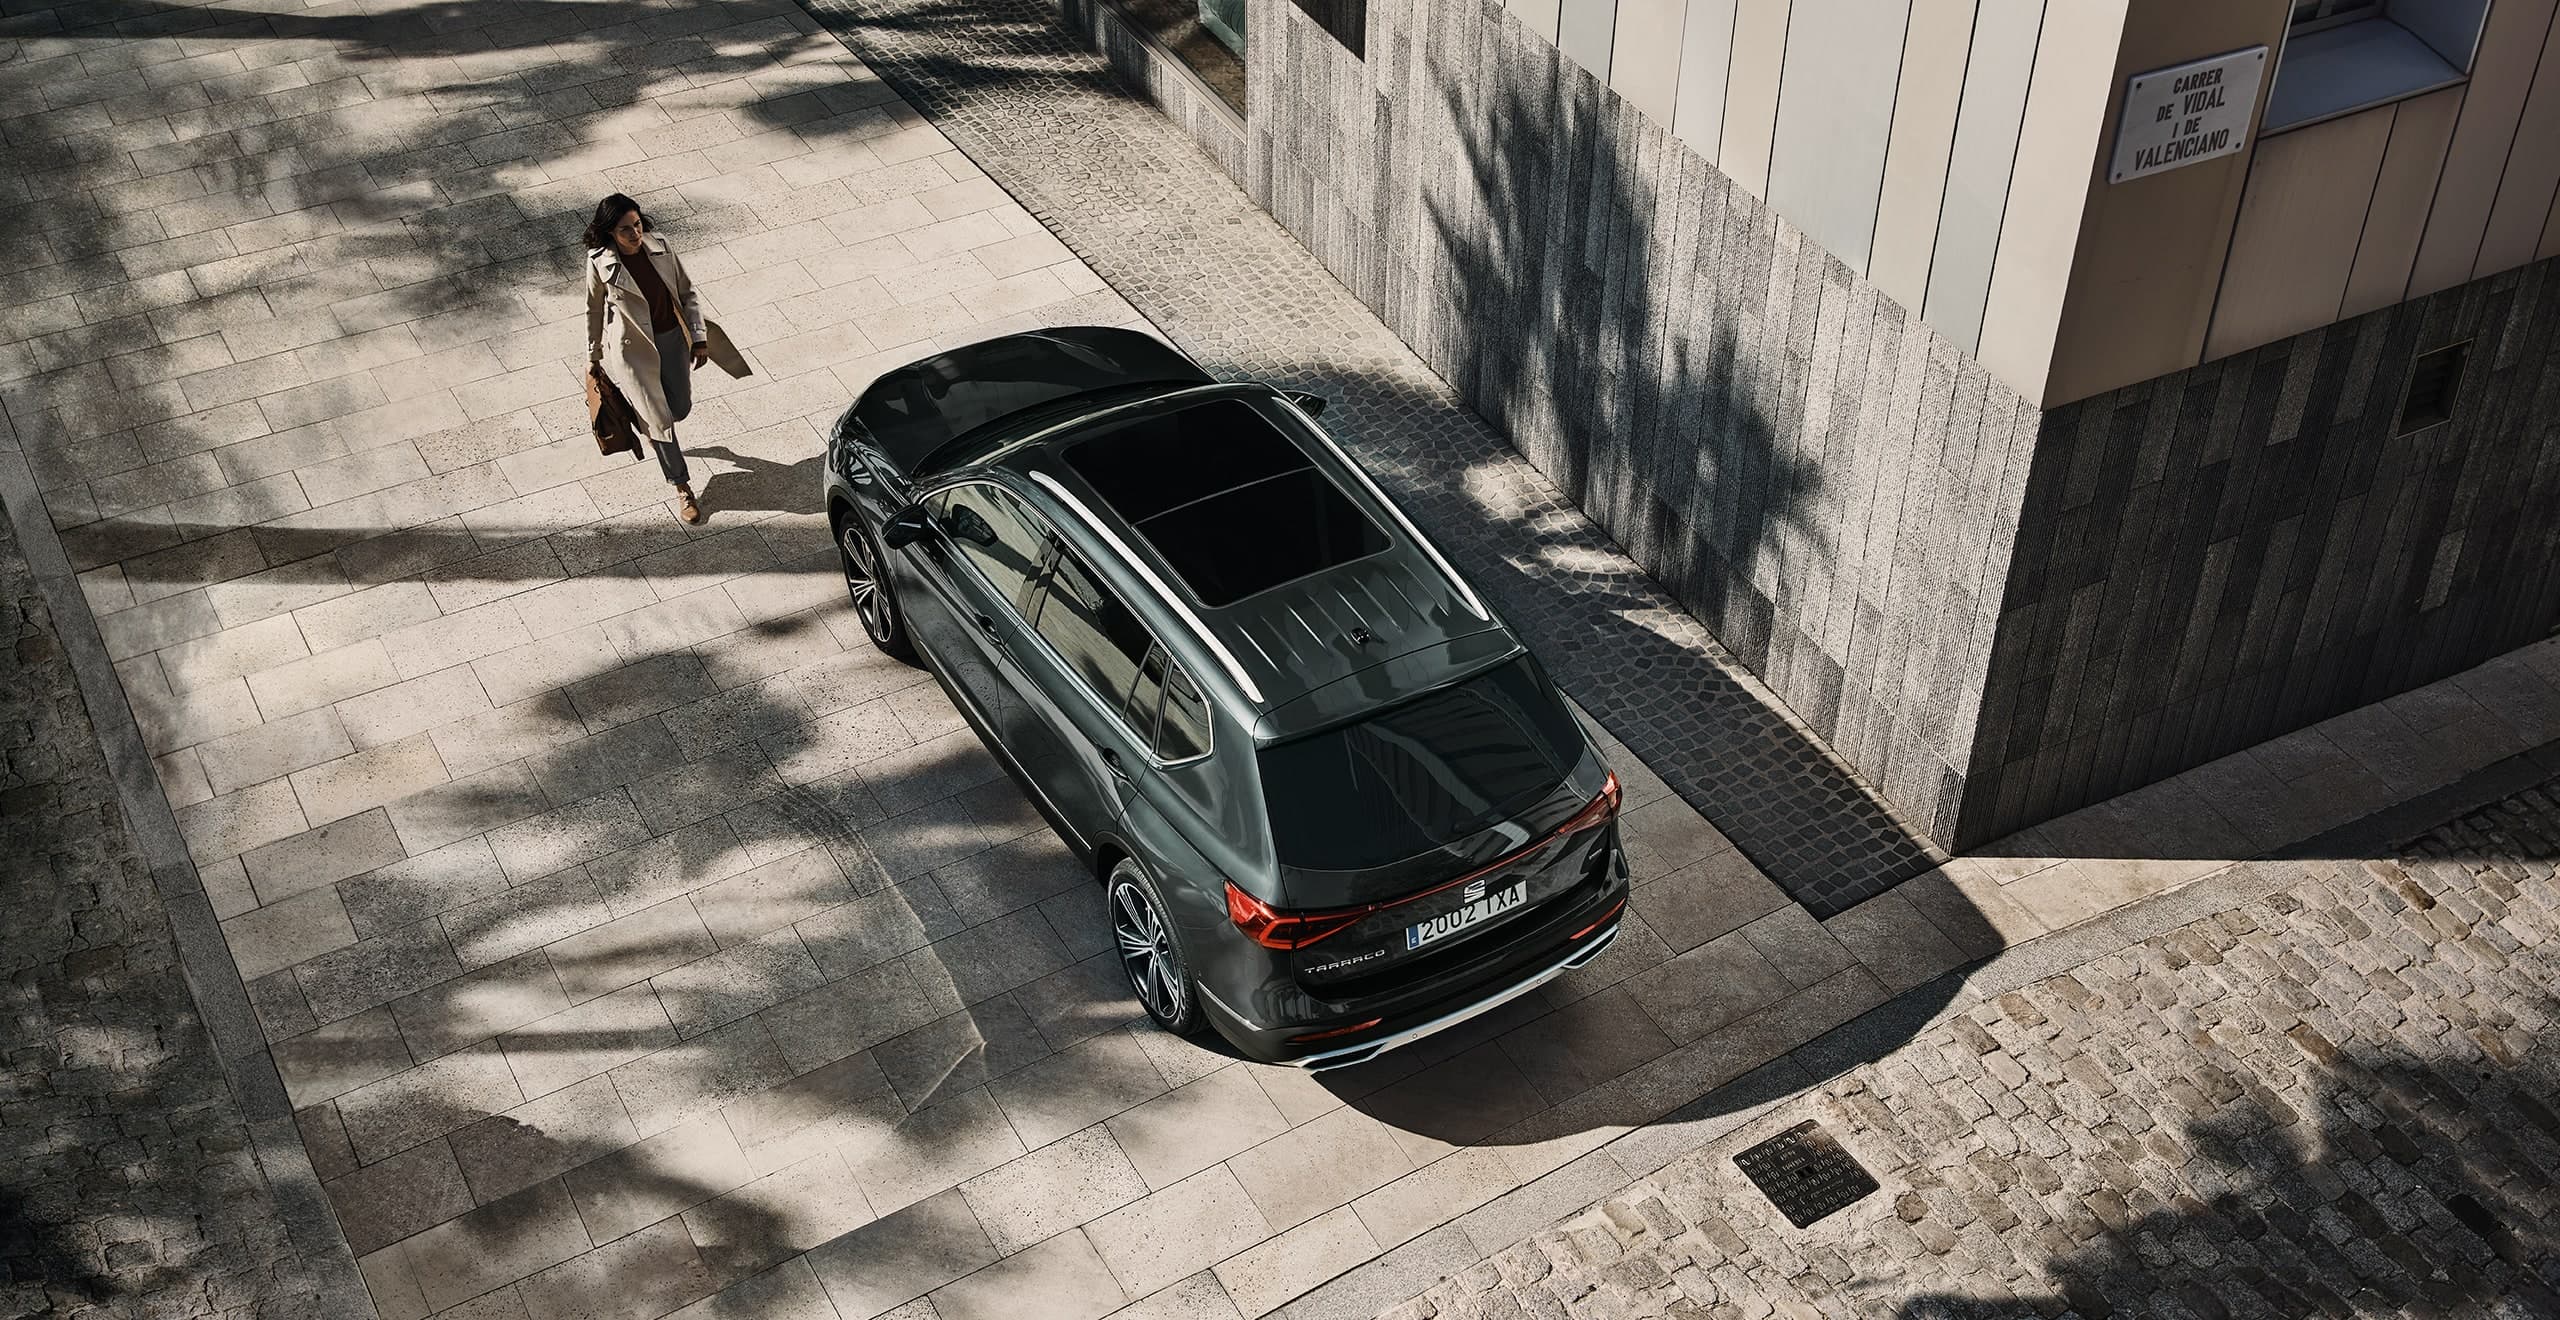 SEAT Tarraco 7 seater roof top view